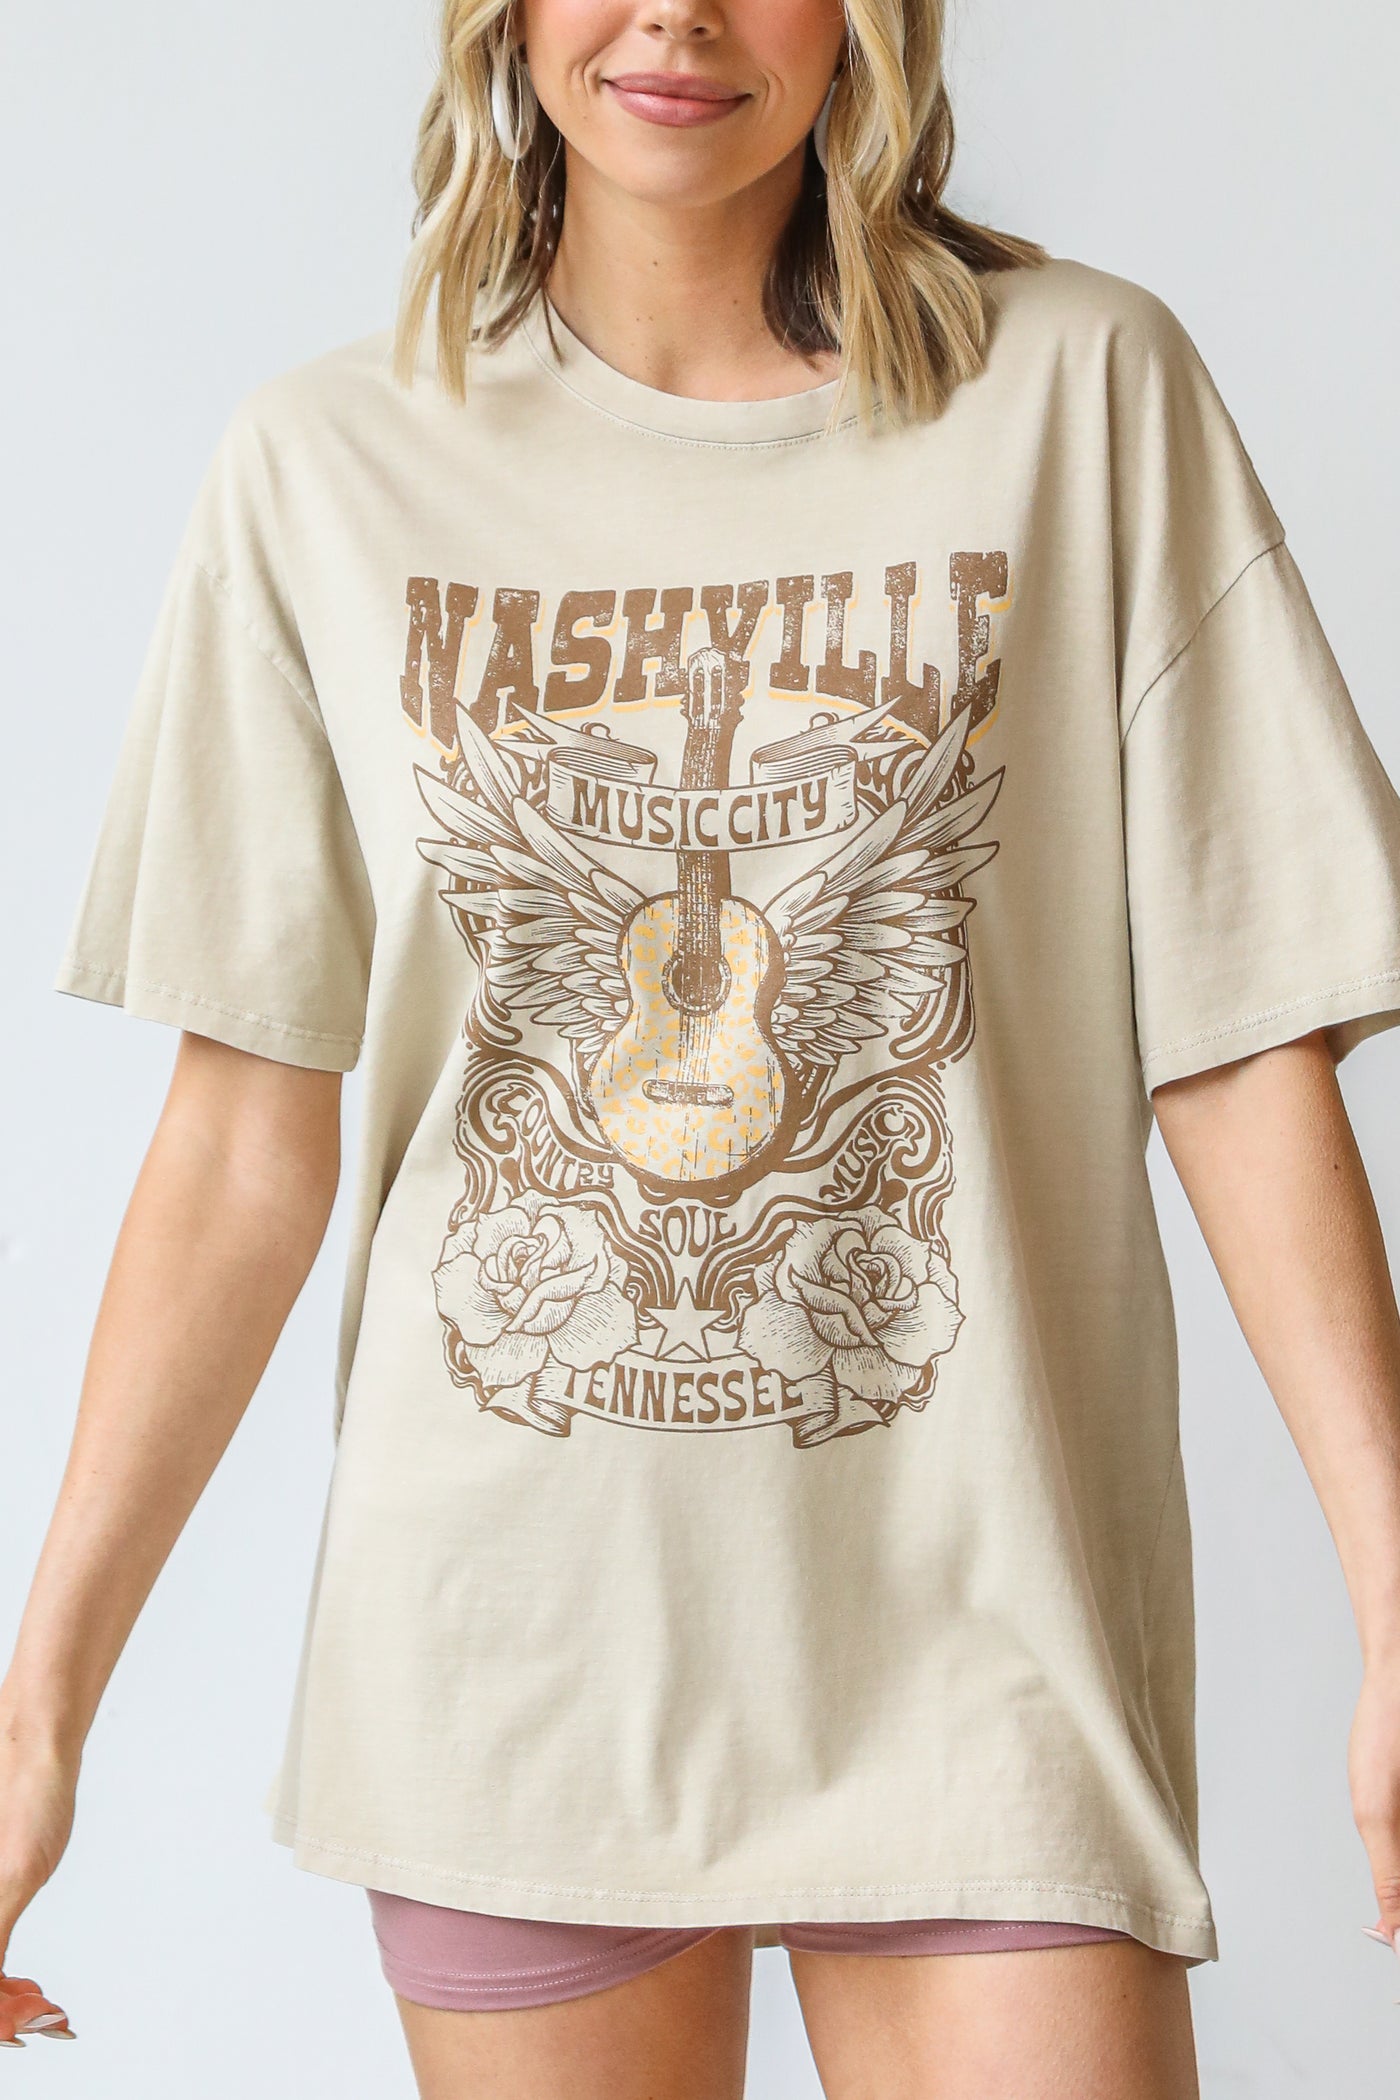 Nashville Music City Graphic Tee front view